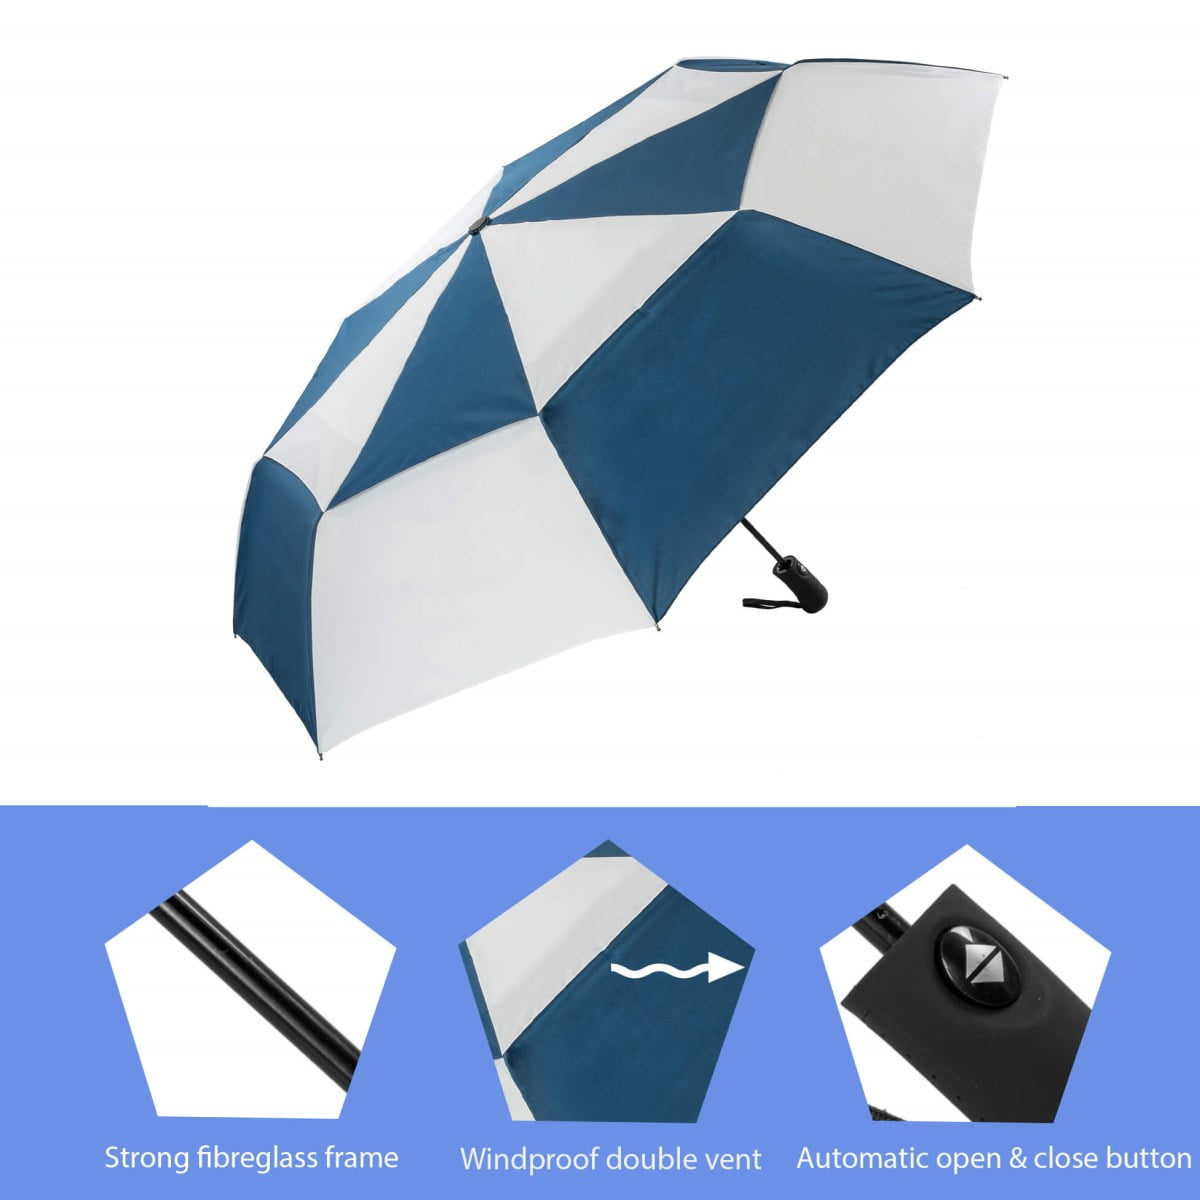 Navy and White Folding Golf Umbrella showing features